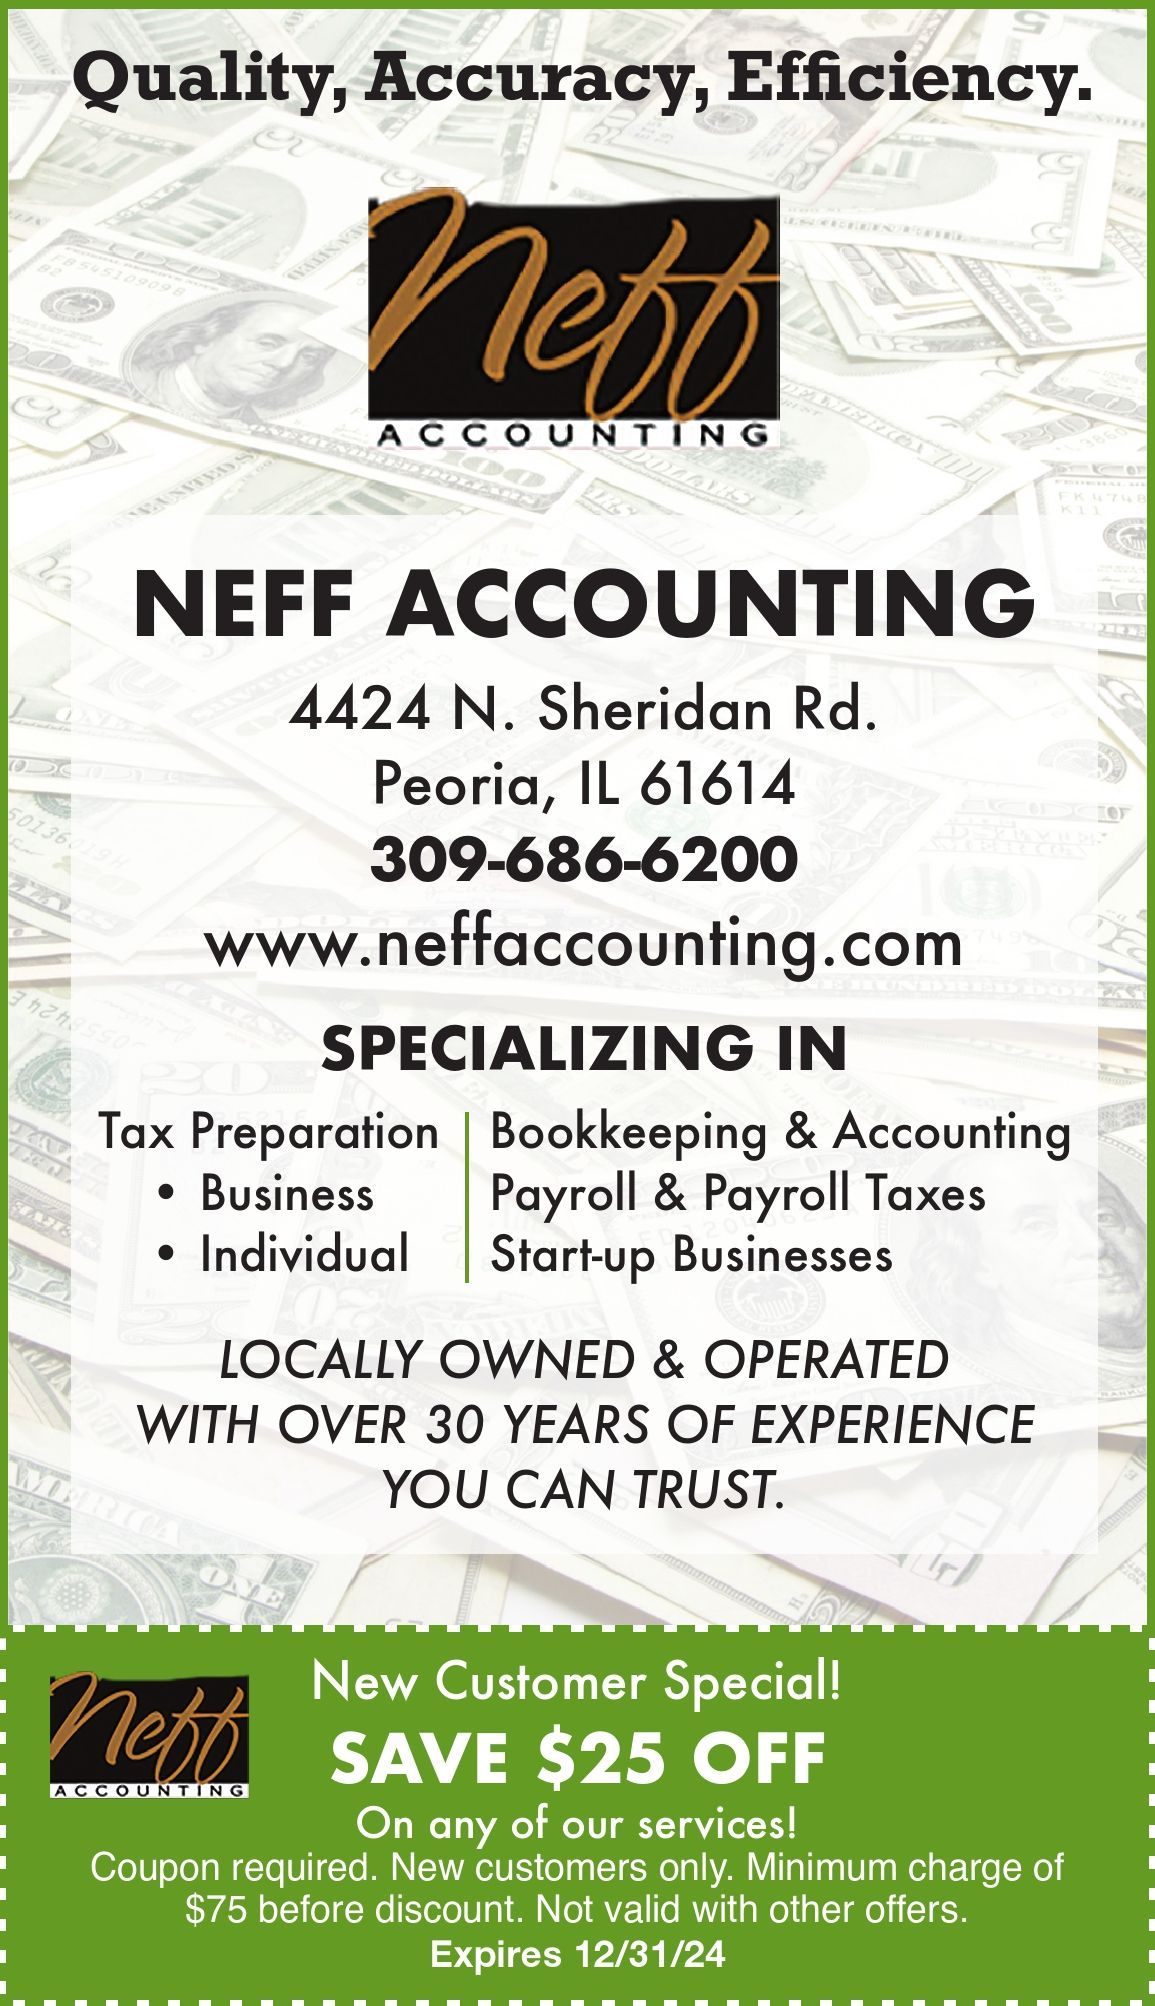 neff accounting $25 off any service, business, individuals, tax extensions, bookkeeping, start-up business. Peoria, IL